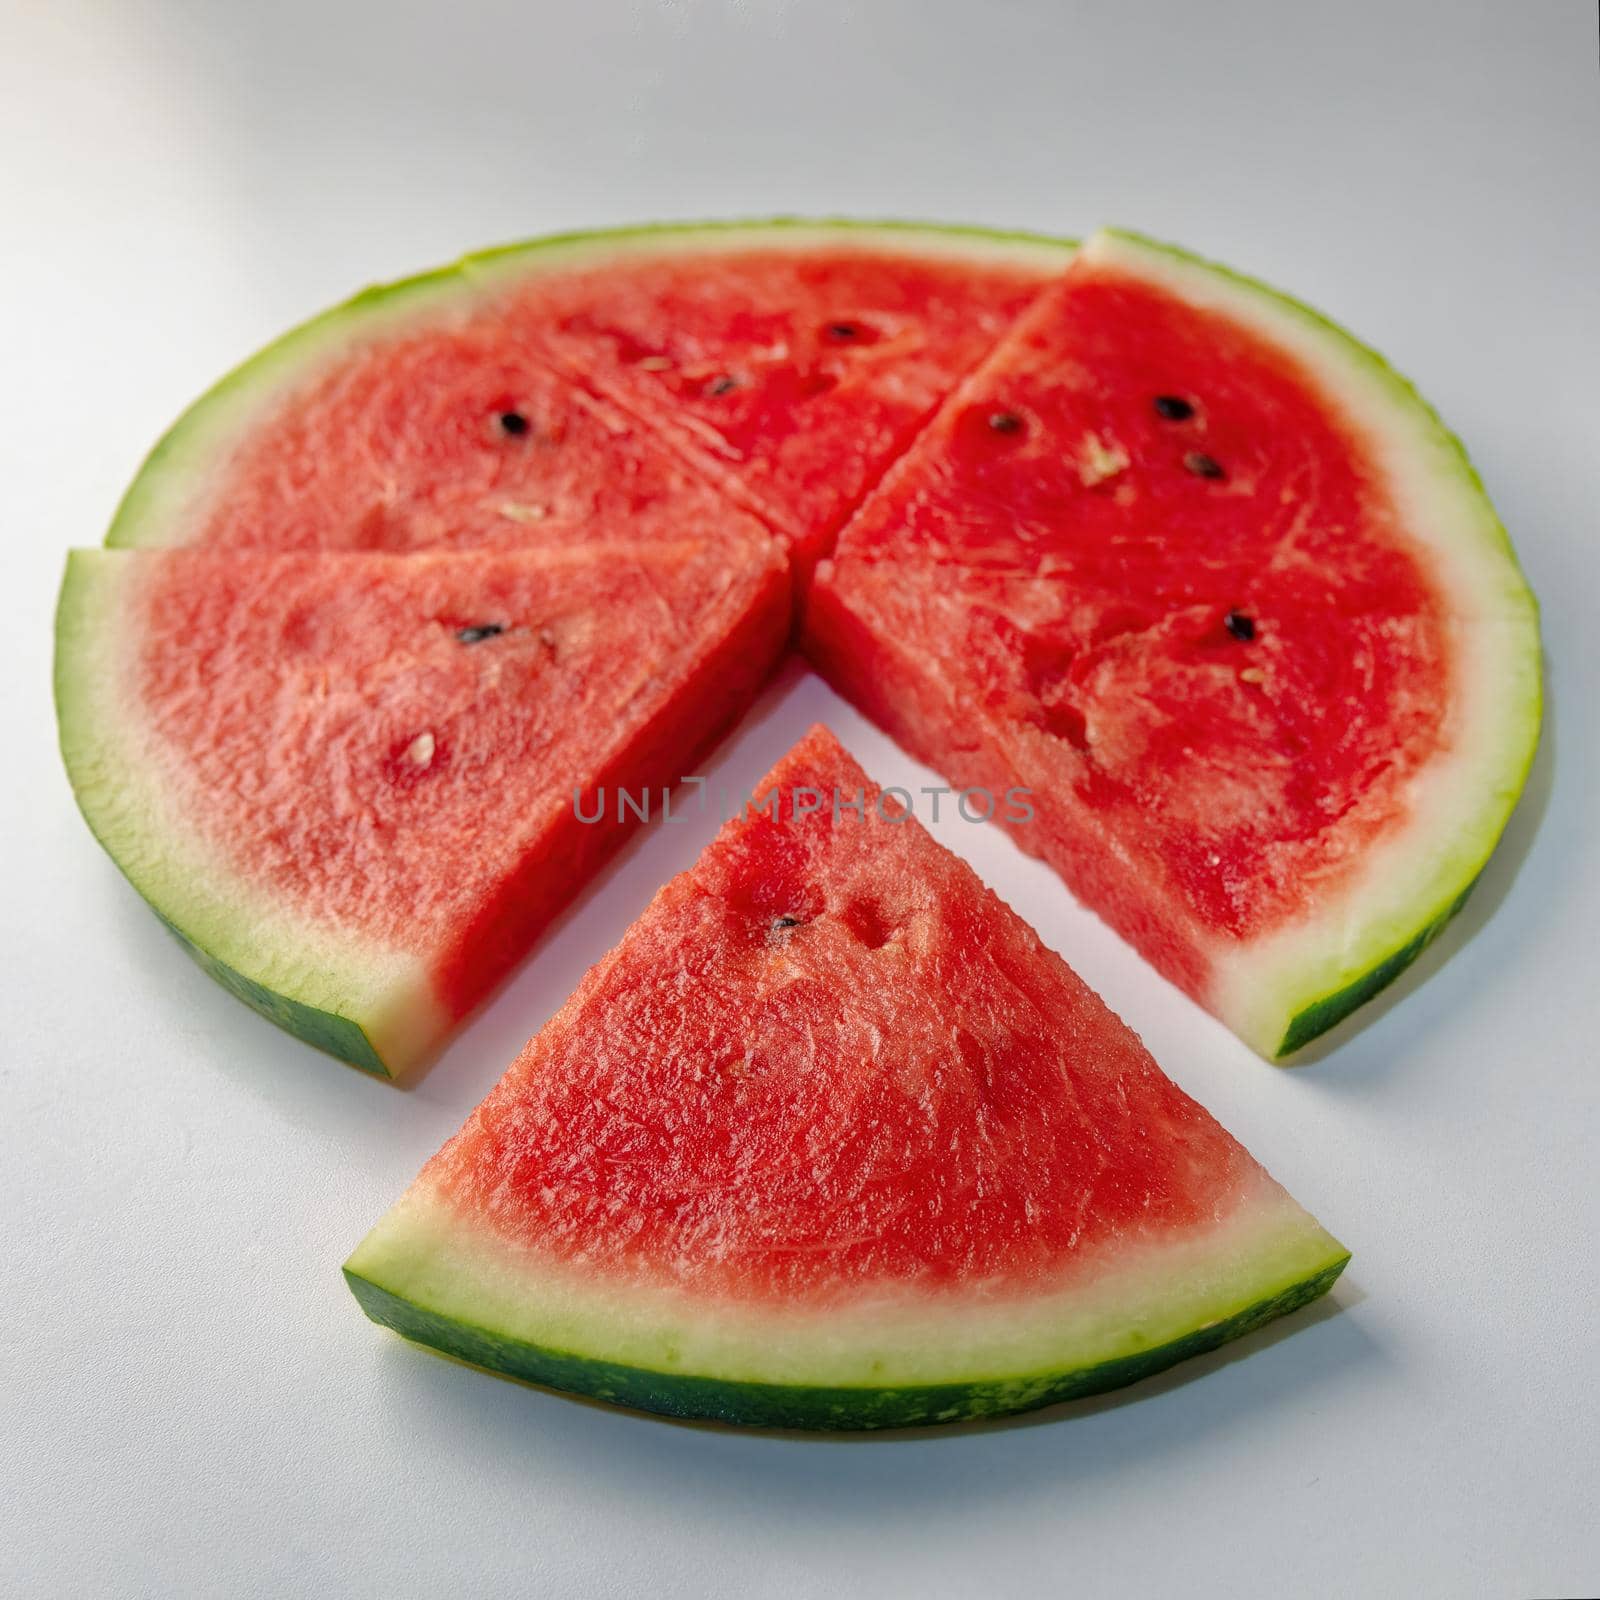 Slices of fresh red delicious watermelon are laid out in a circle on a colored background.